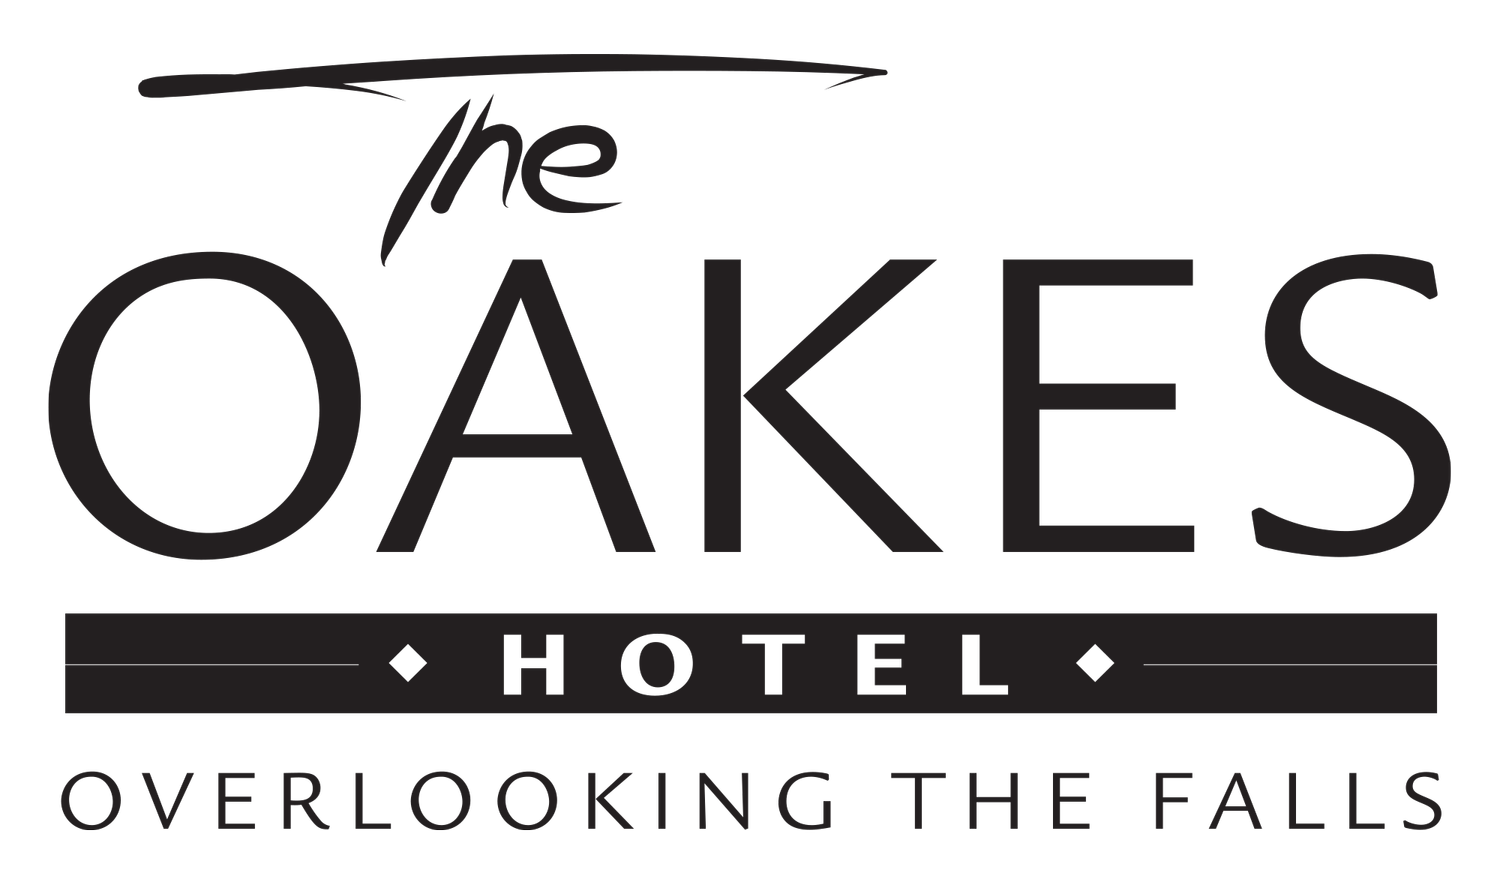 The Oakes Hotel: Overlooking the Falls